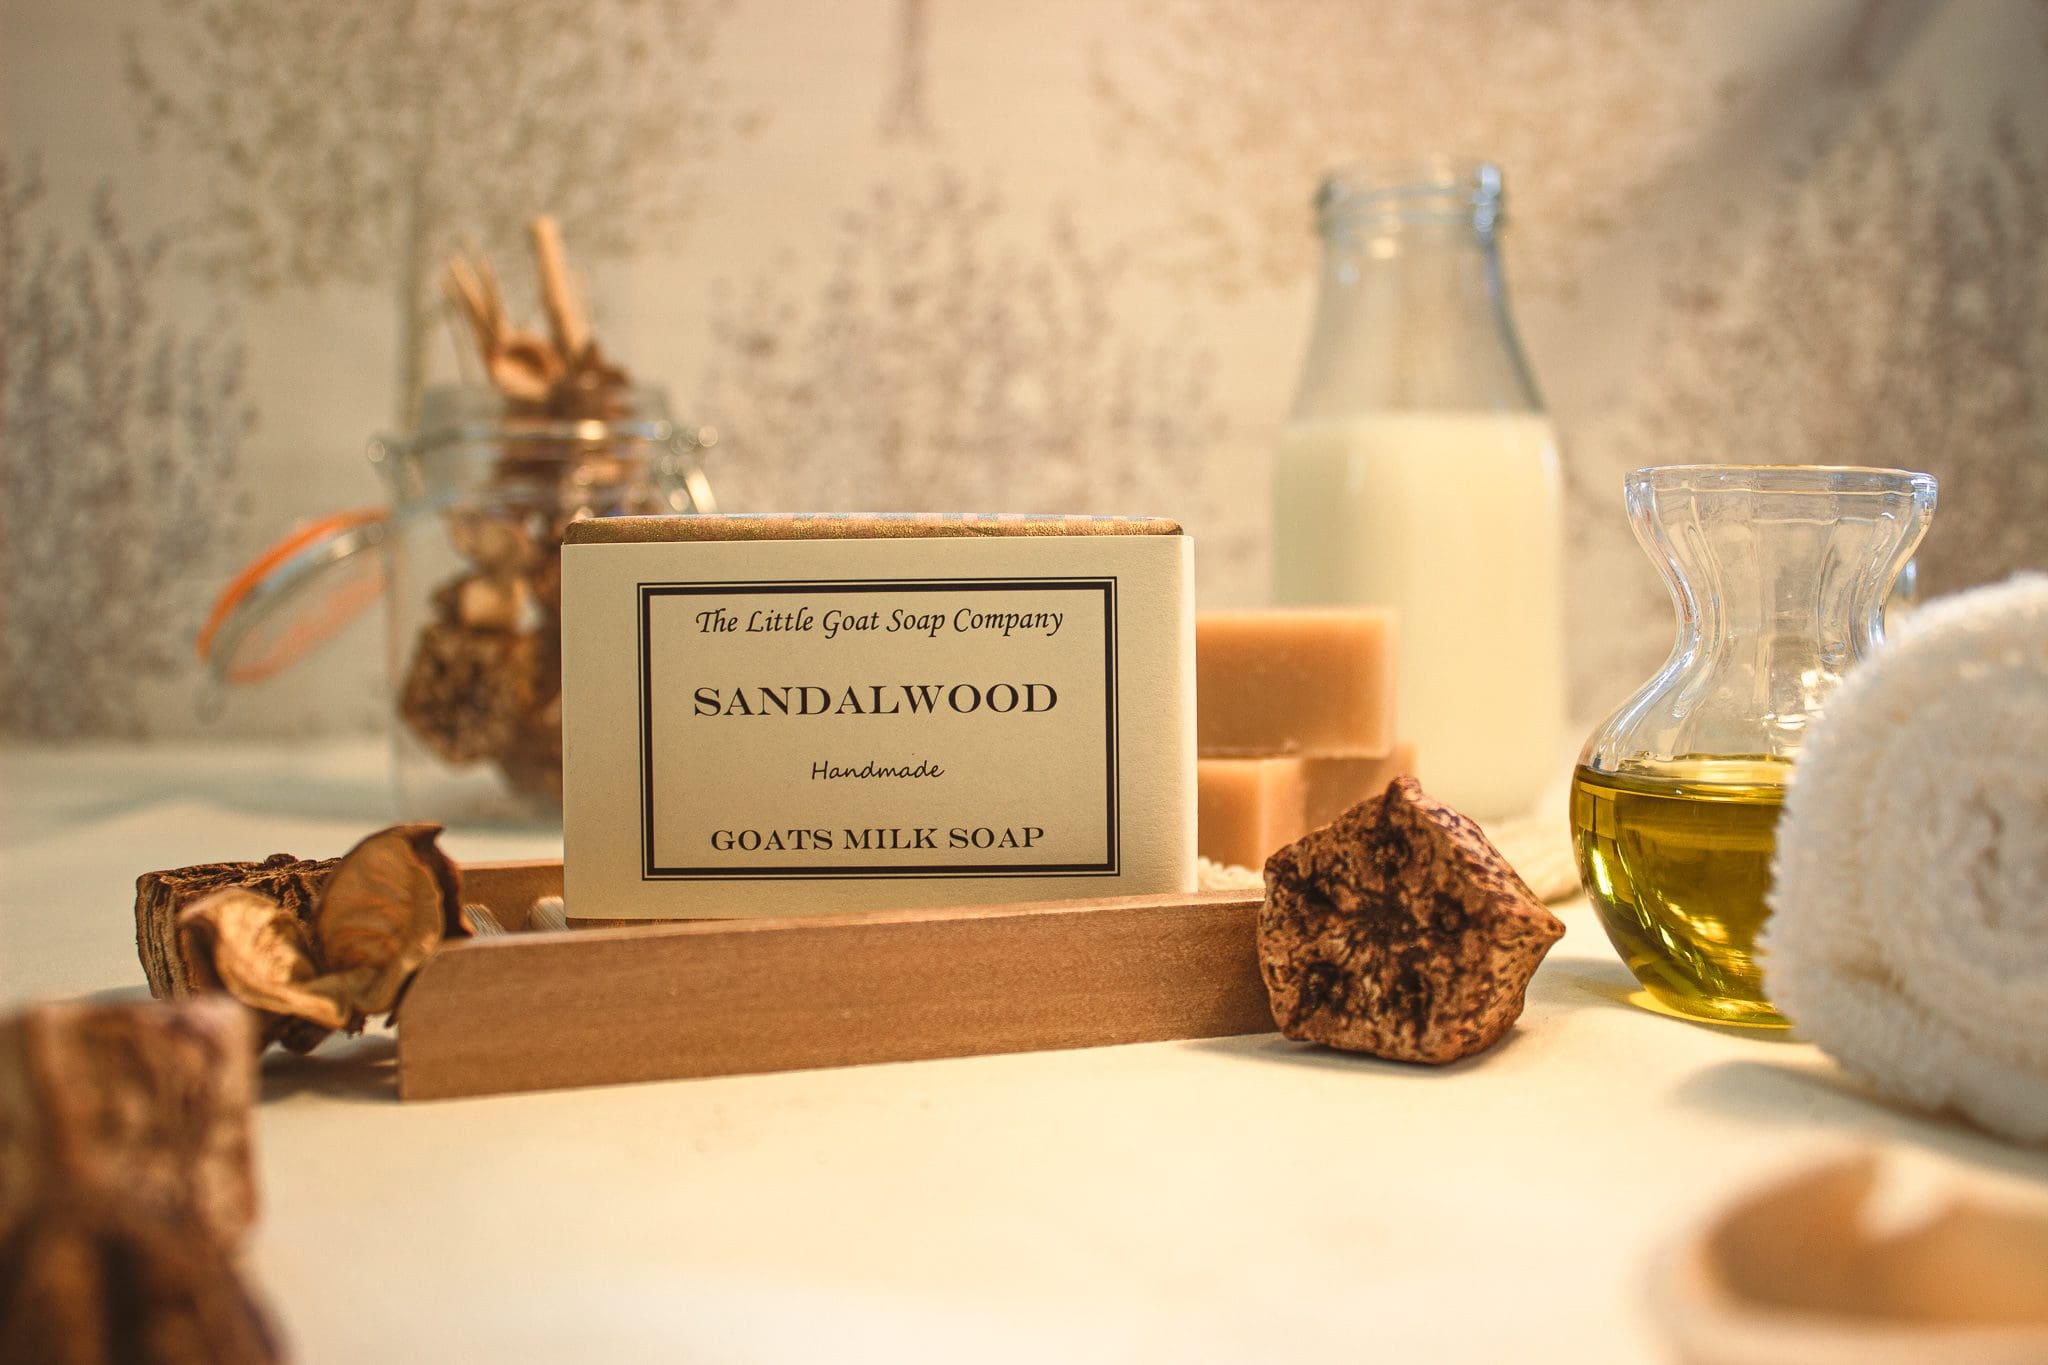 Sandalwood soap from the little goat soap company set dressed with pieces of sandalwood, jars of oil and a bottle of goat milk soap